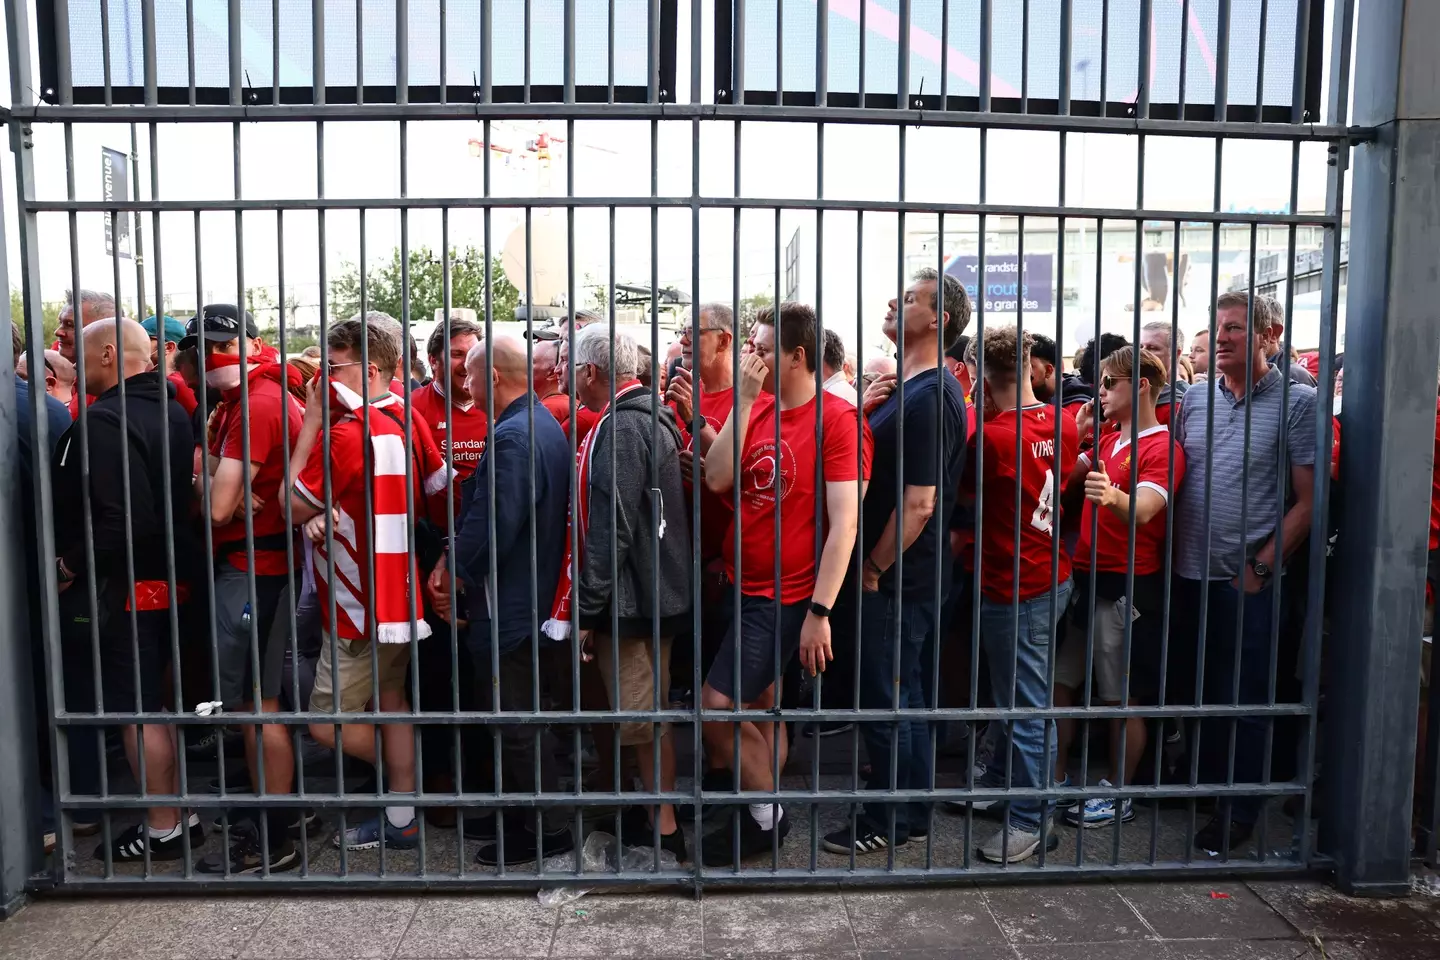 Fans waited hours to get into the ground. Image: Alamy